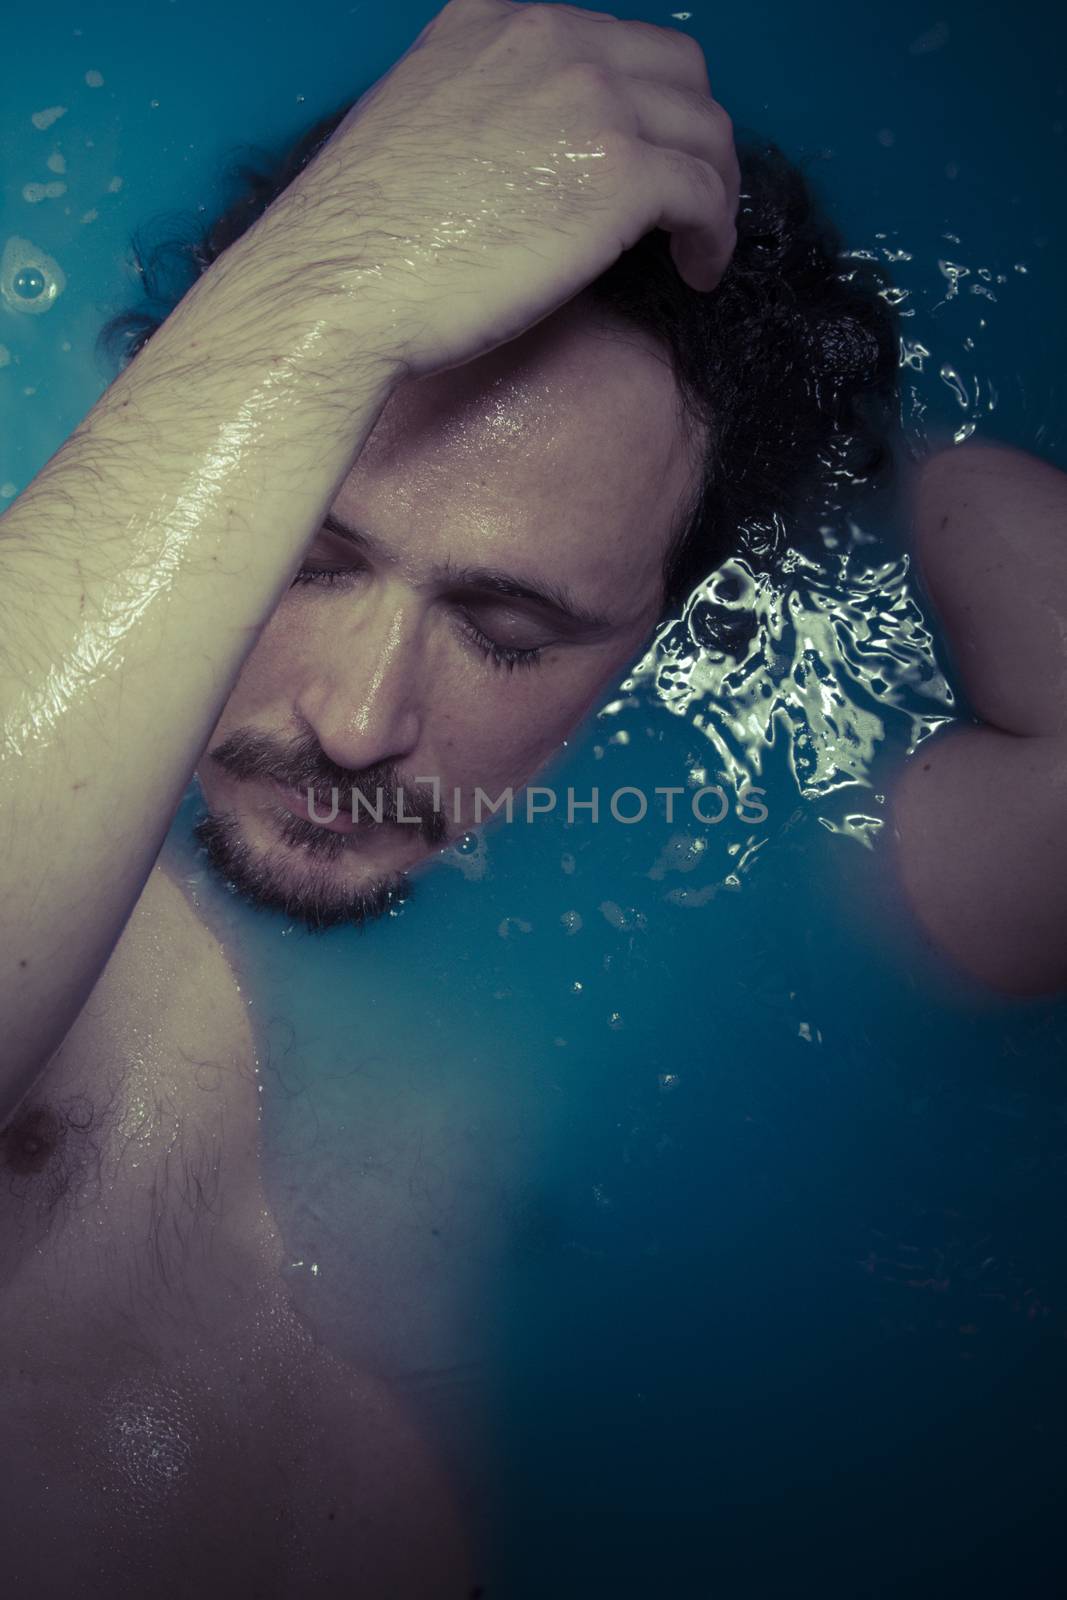 Depression, man in blue tub full of water, sadness concept by FernandoCortes